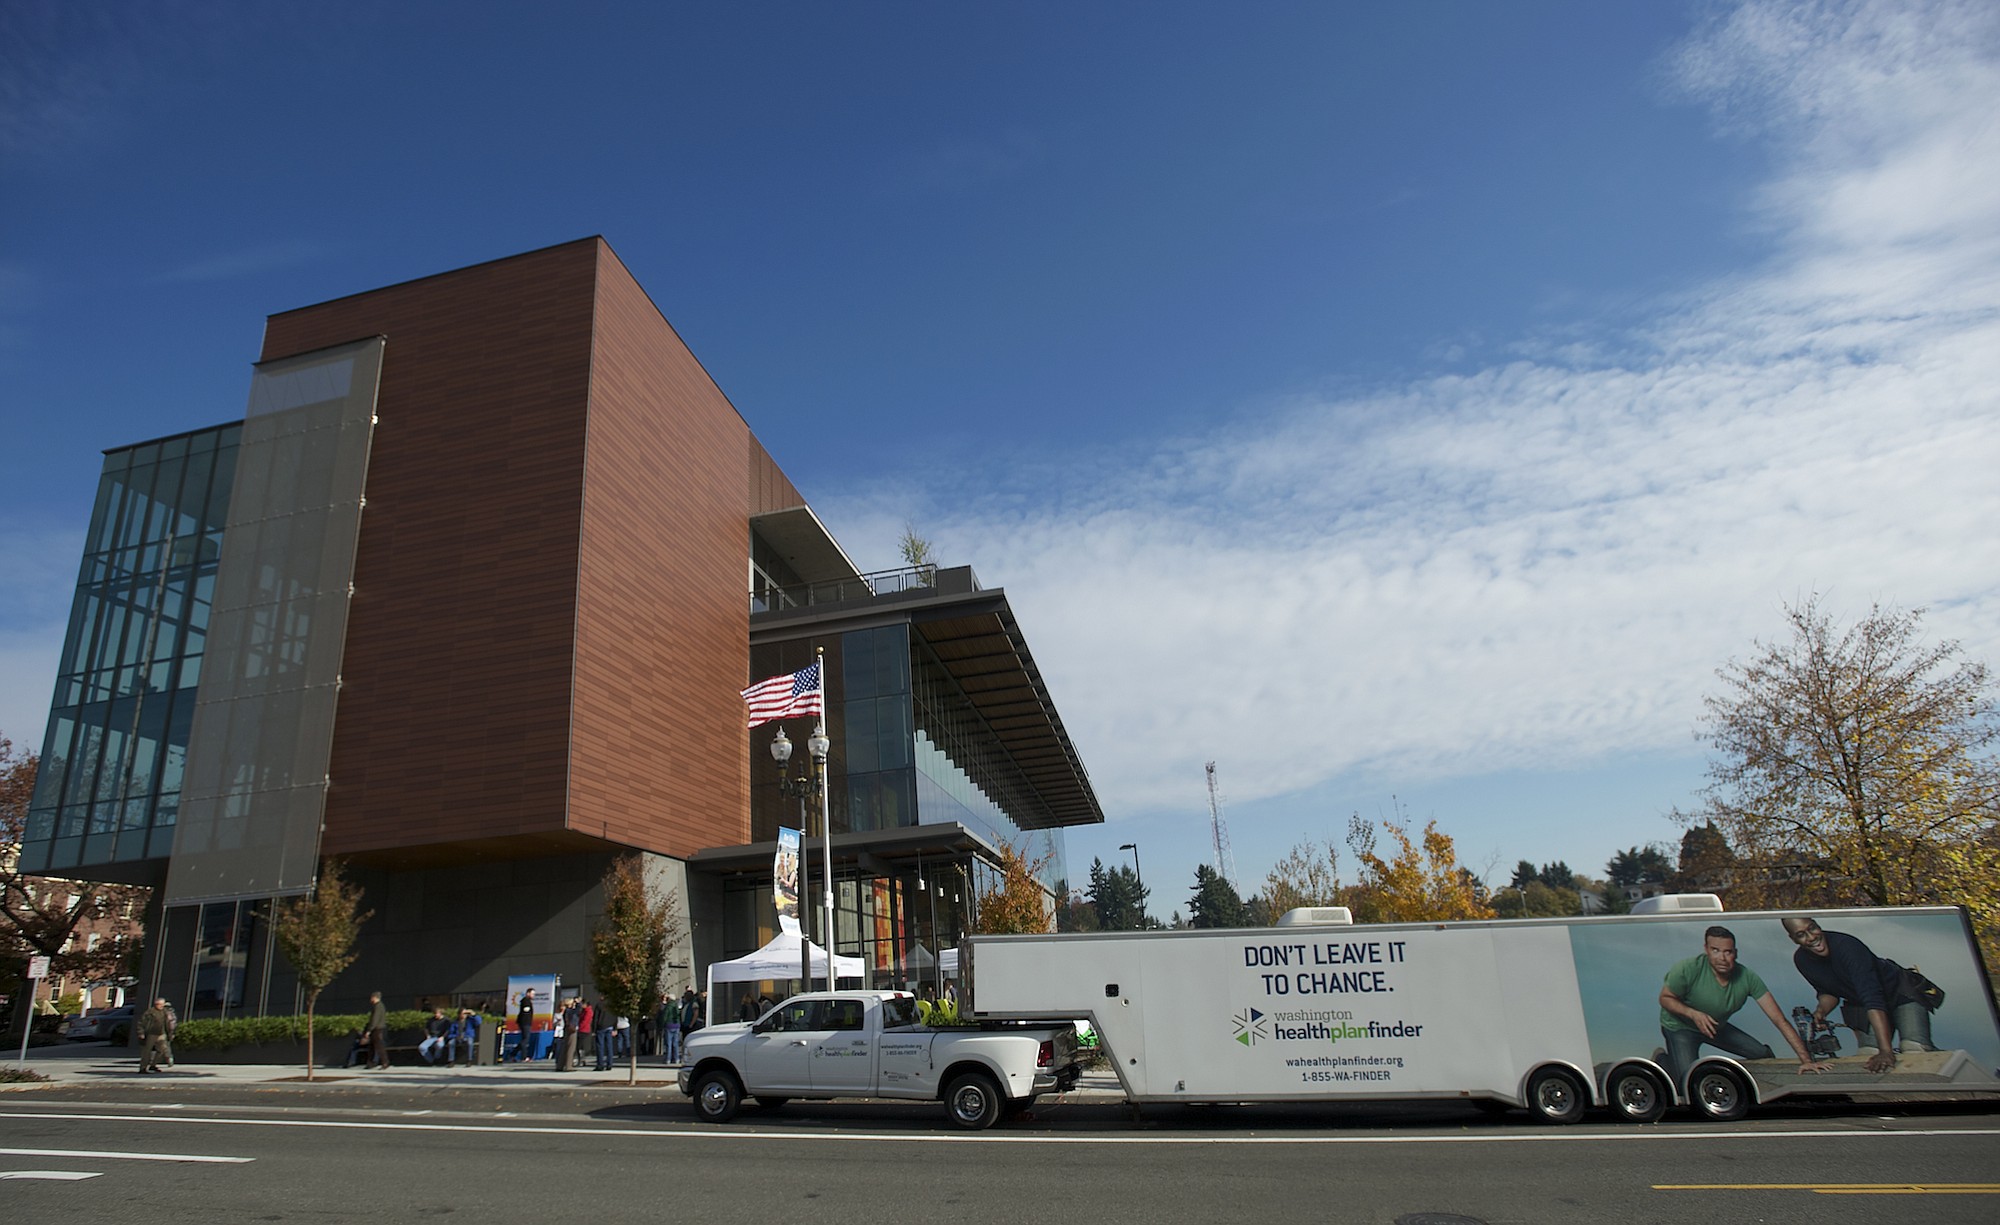 The Vancouver Community Library will host one of two Clark County meet-and-greet sessions with the three finalists for the job of executive director of the Fort Vancouver Regional Library District. Monday's session starts at 6 p.m. in the Columbia Room. The second will start at 6 p.m. Tuesday in the Community Room of the Three Creeks Community Library.